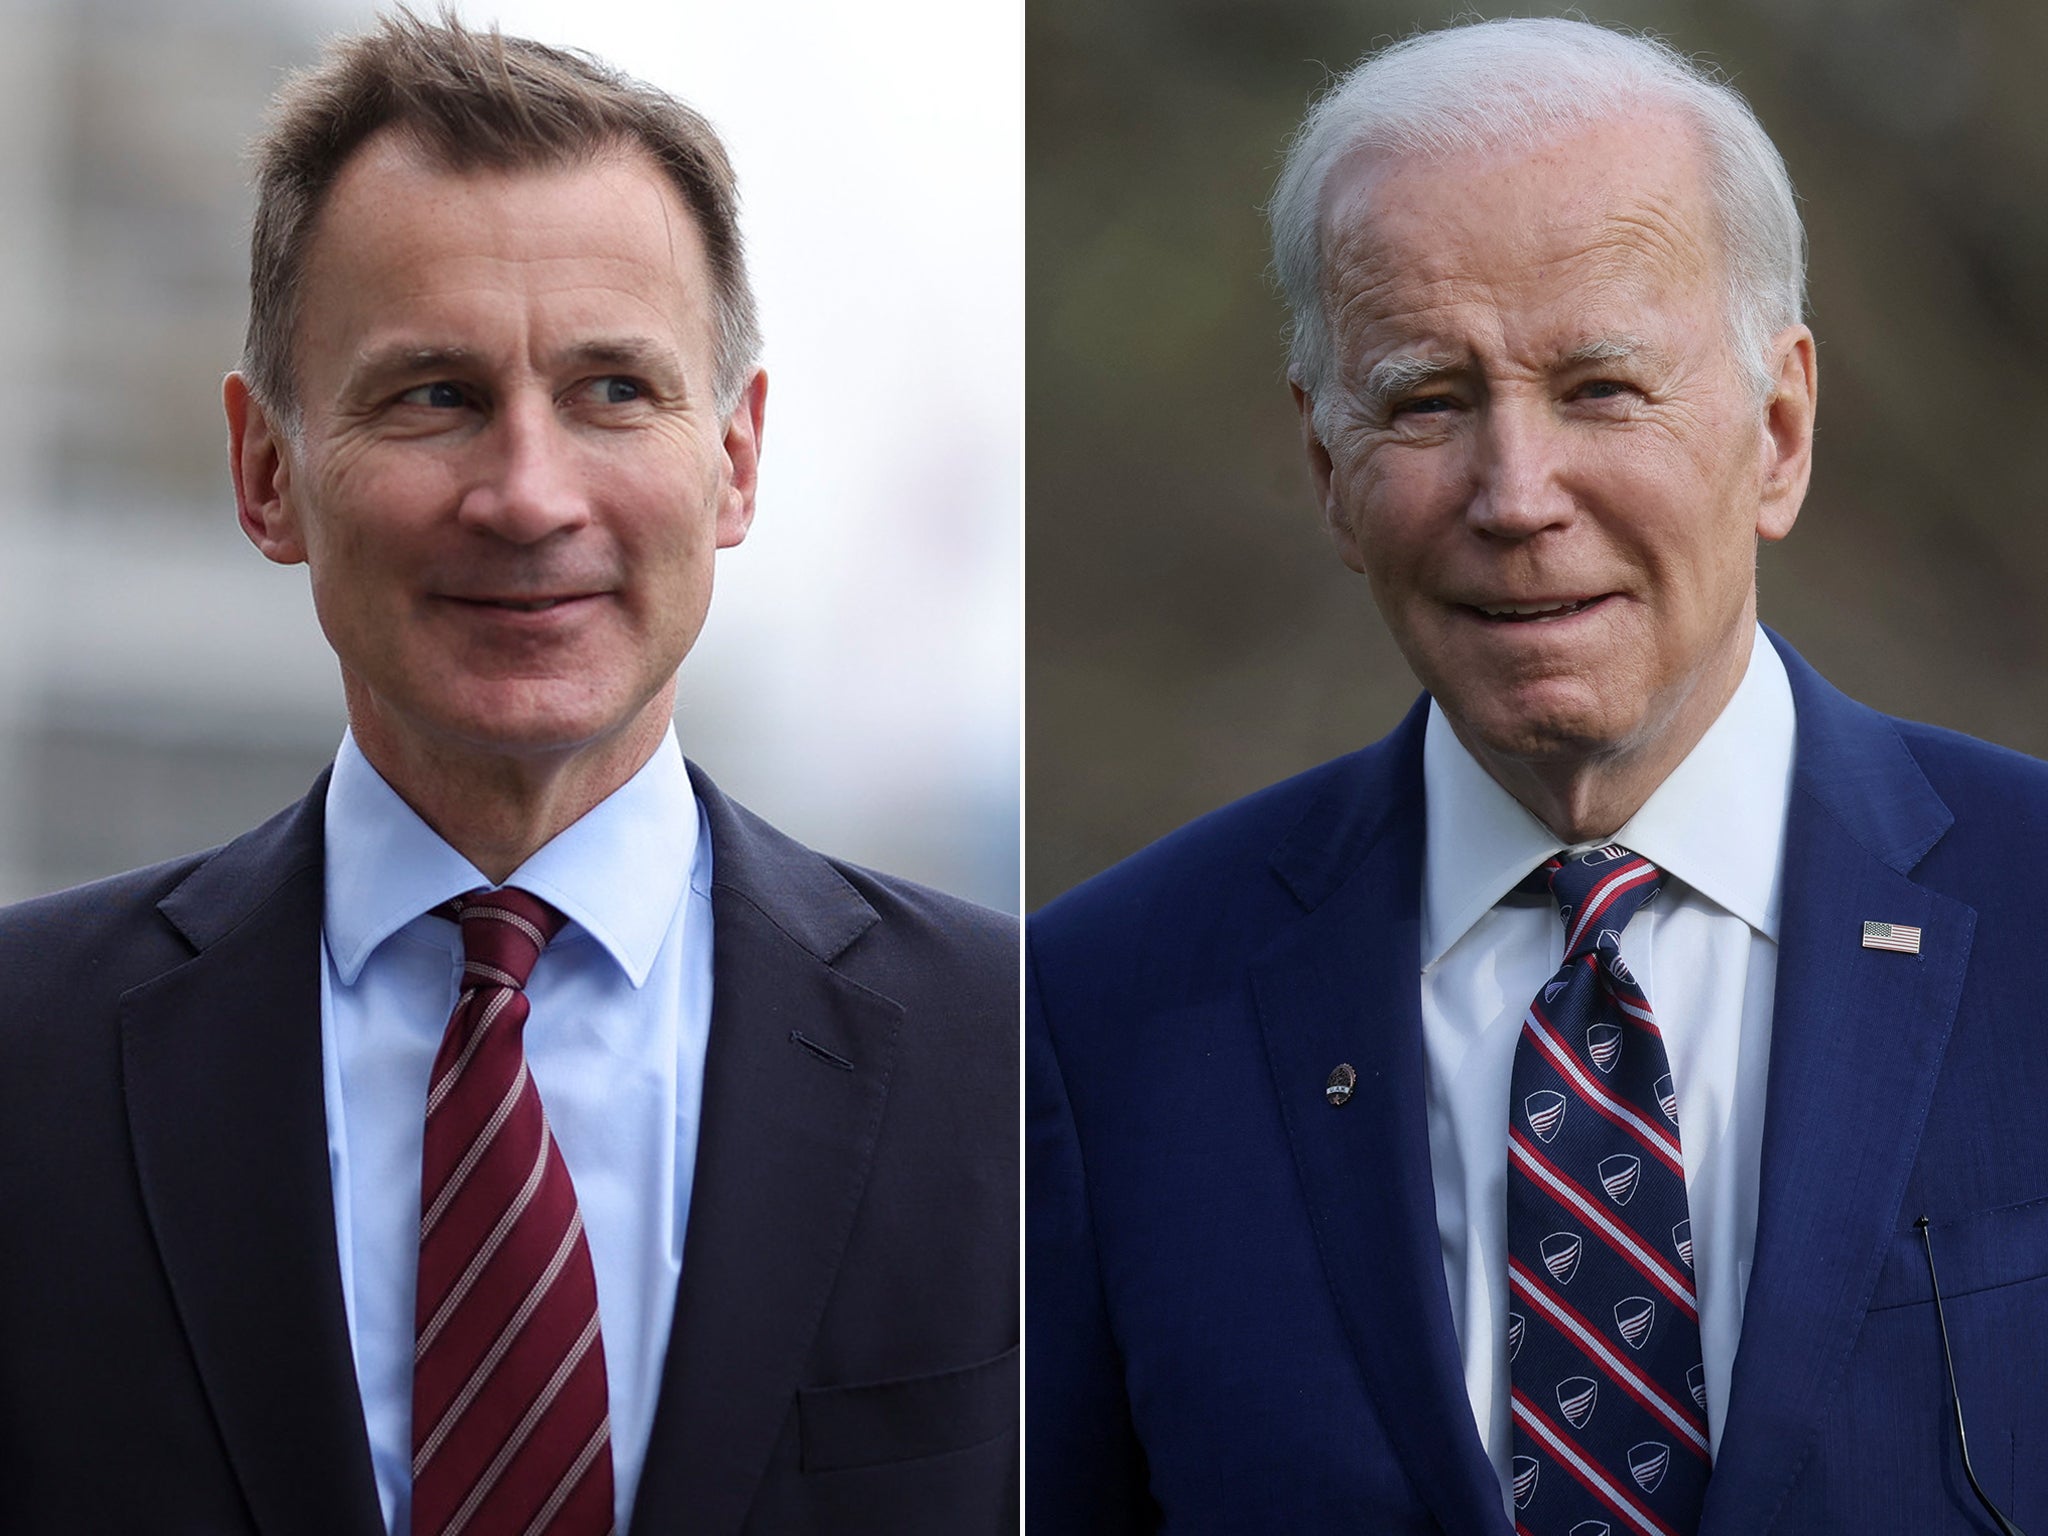 The plan does indeed come close to matching the ambition of Biden’s IRA